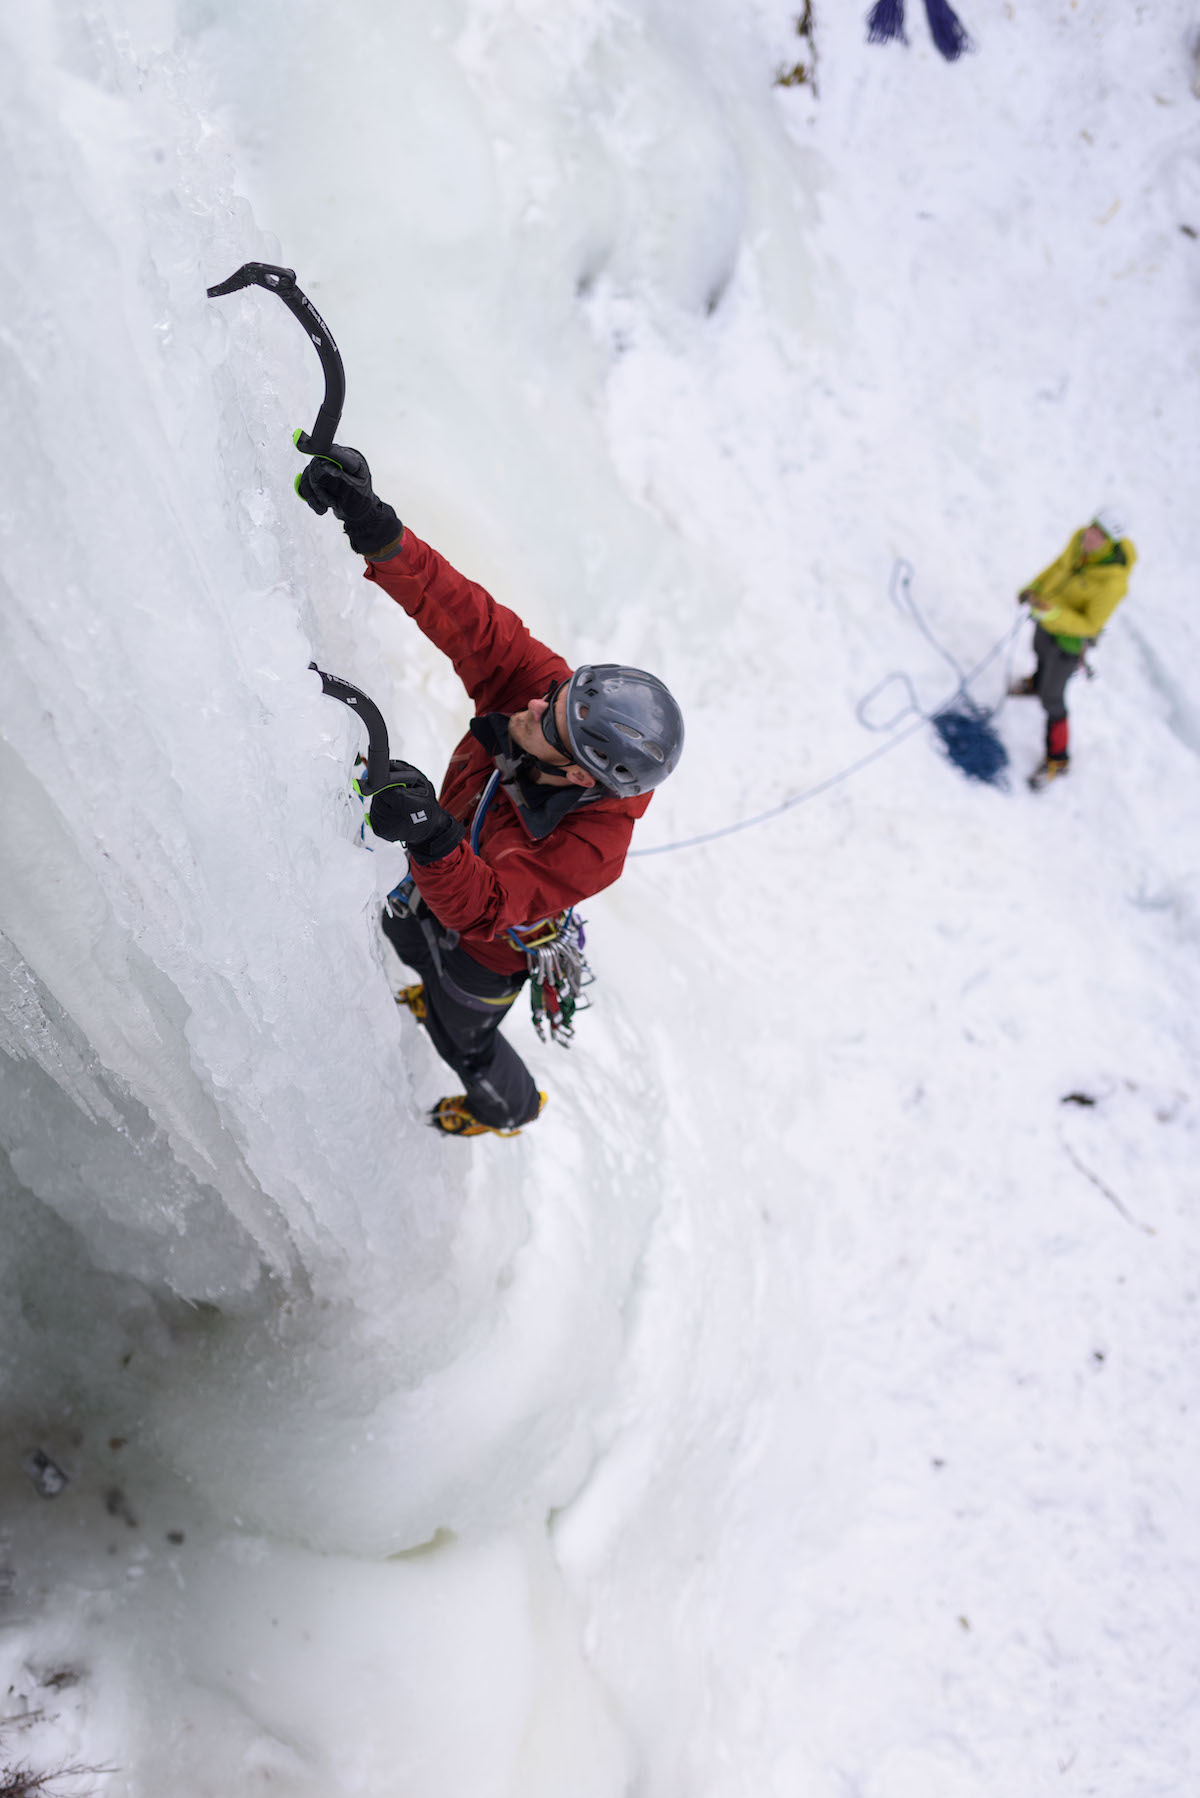 Todd Preston leads Alpha (WI5) with the Black Diamond Reactor ice tools in Hyalite Canyon, Montana. [Photo] Jim Menkol